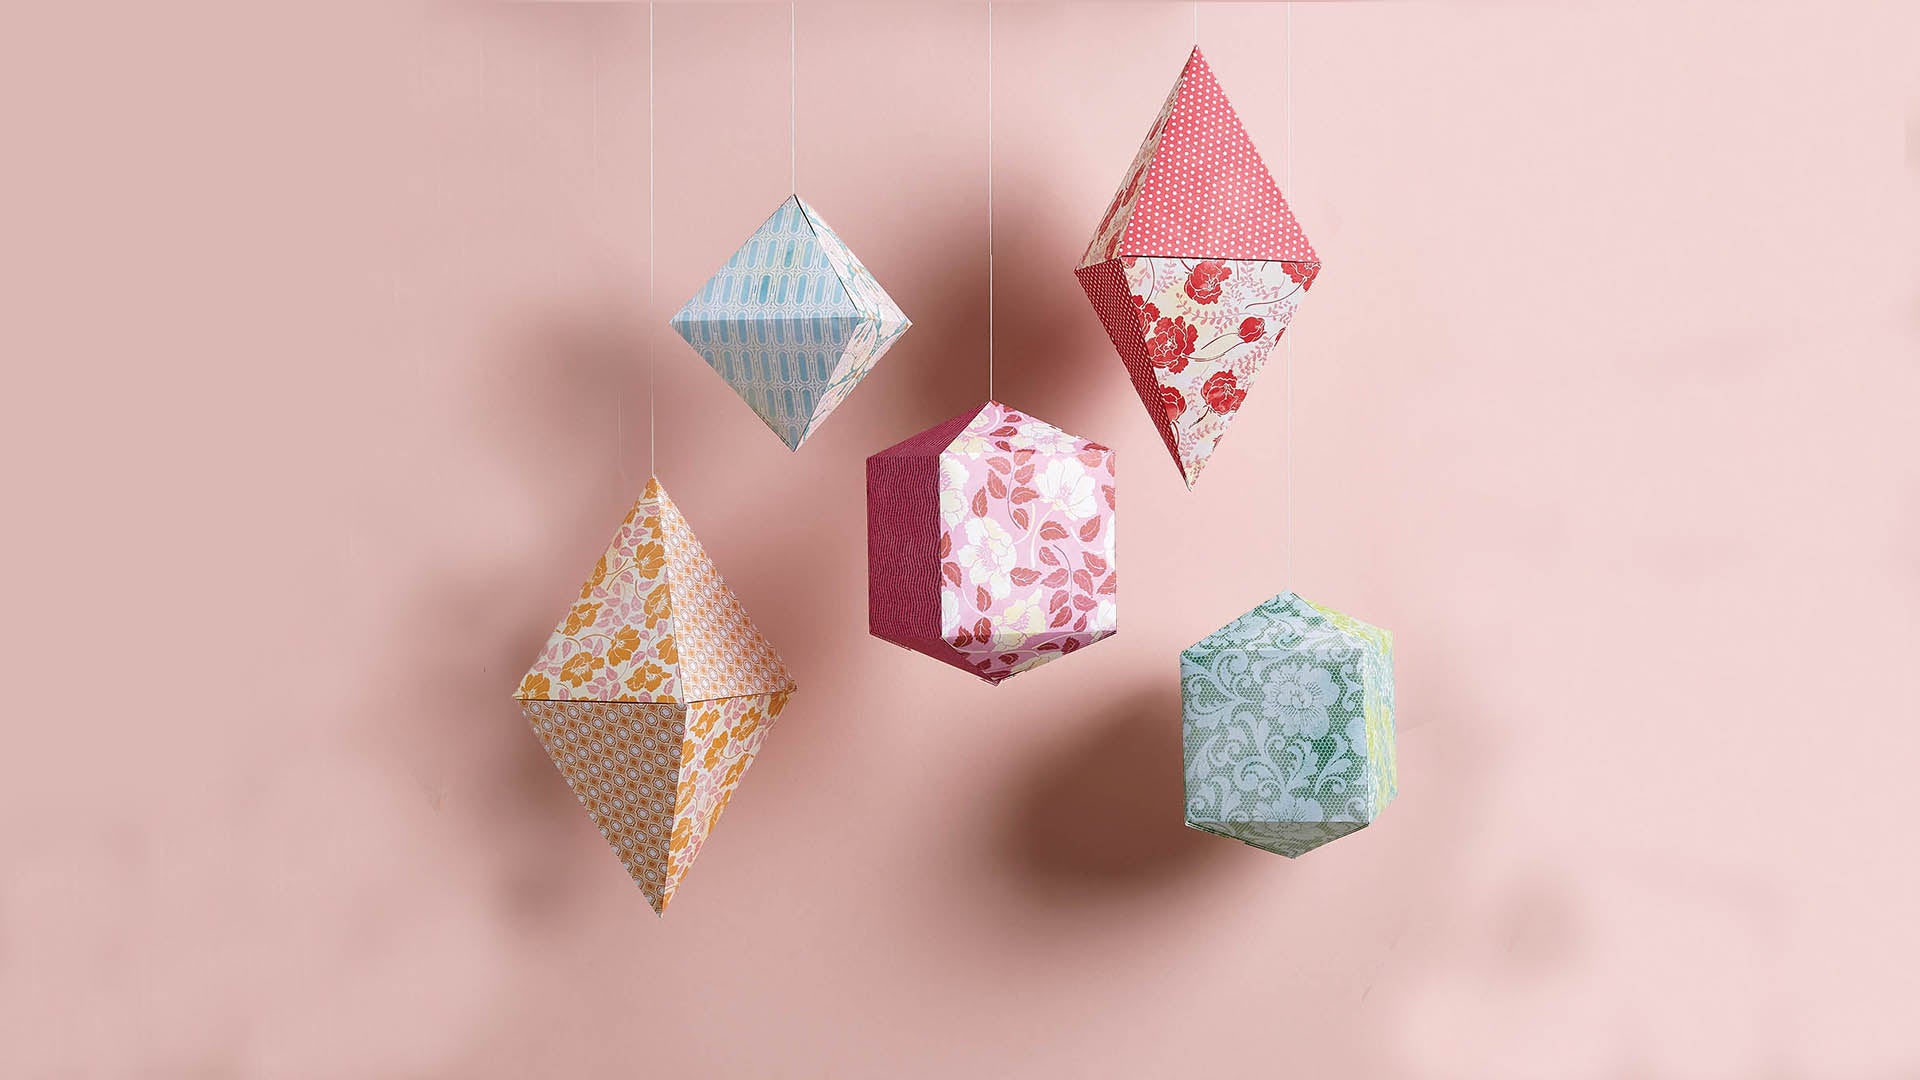 How To Make Solid Geometry Paper Lantern at Home With Children?